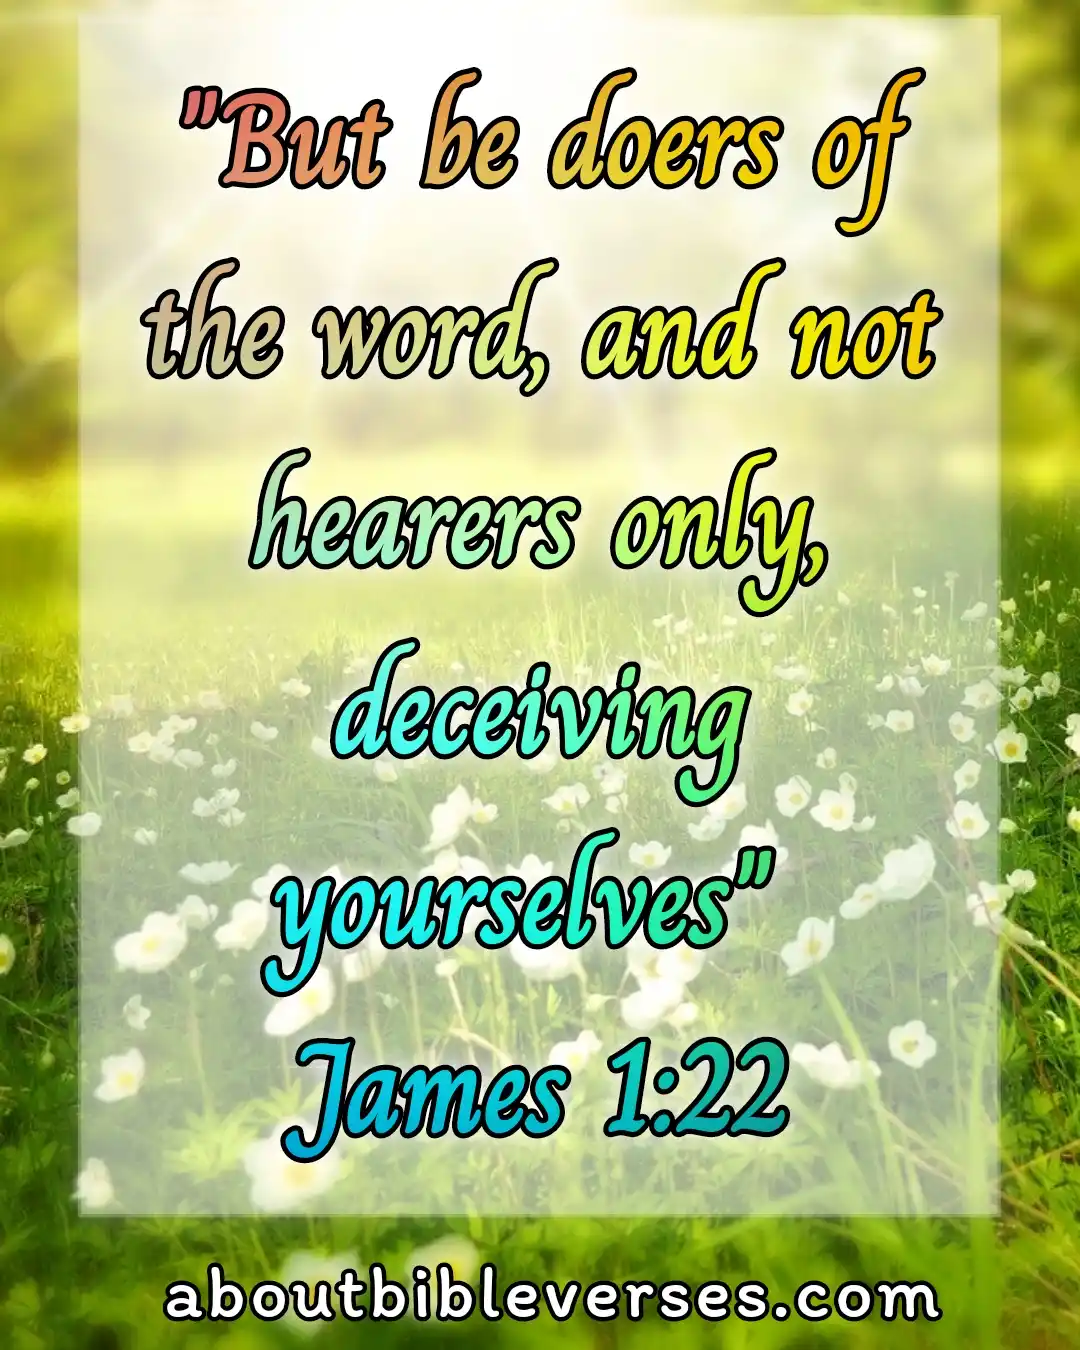 Applying Scripture To Everyday Life (James 1:22)